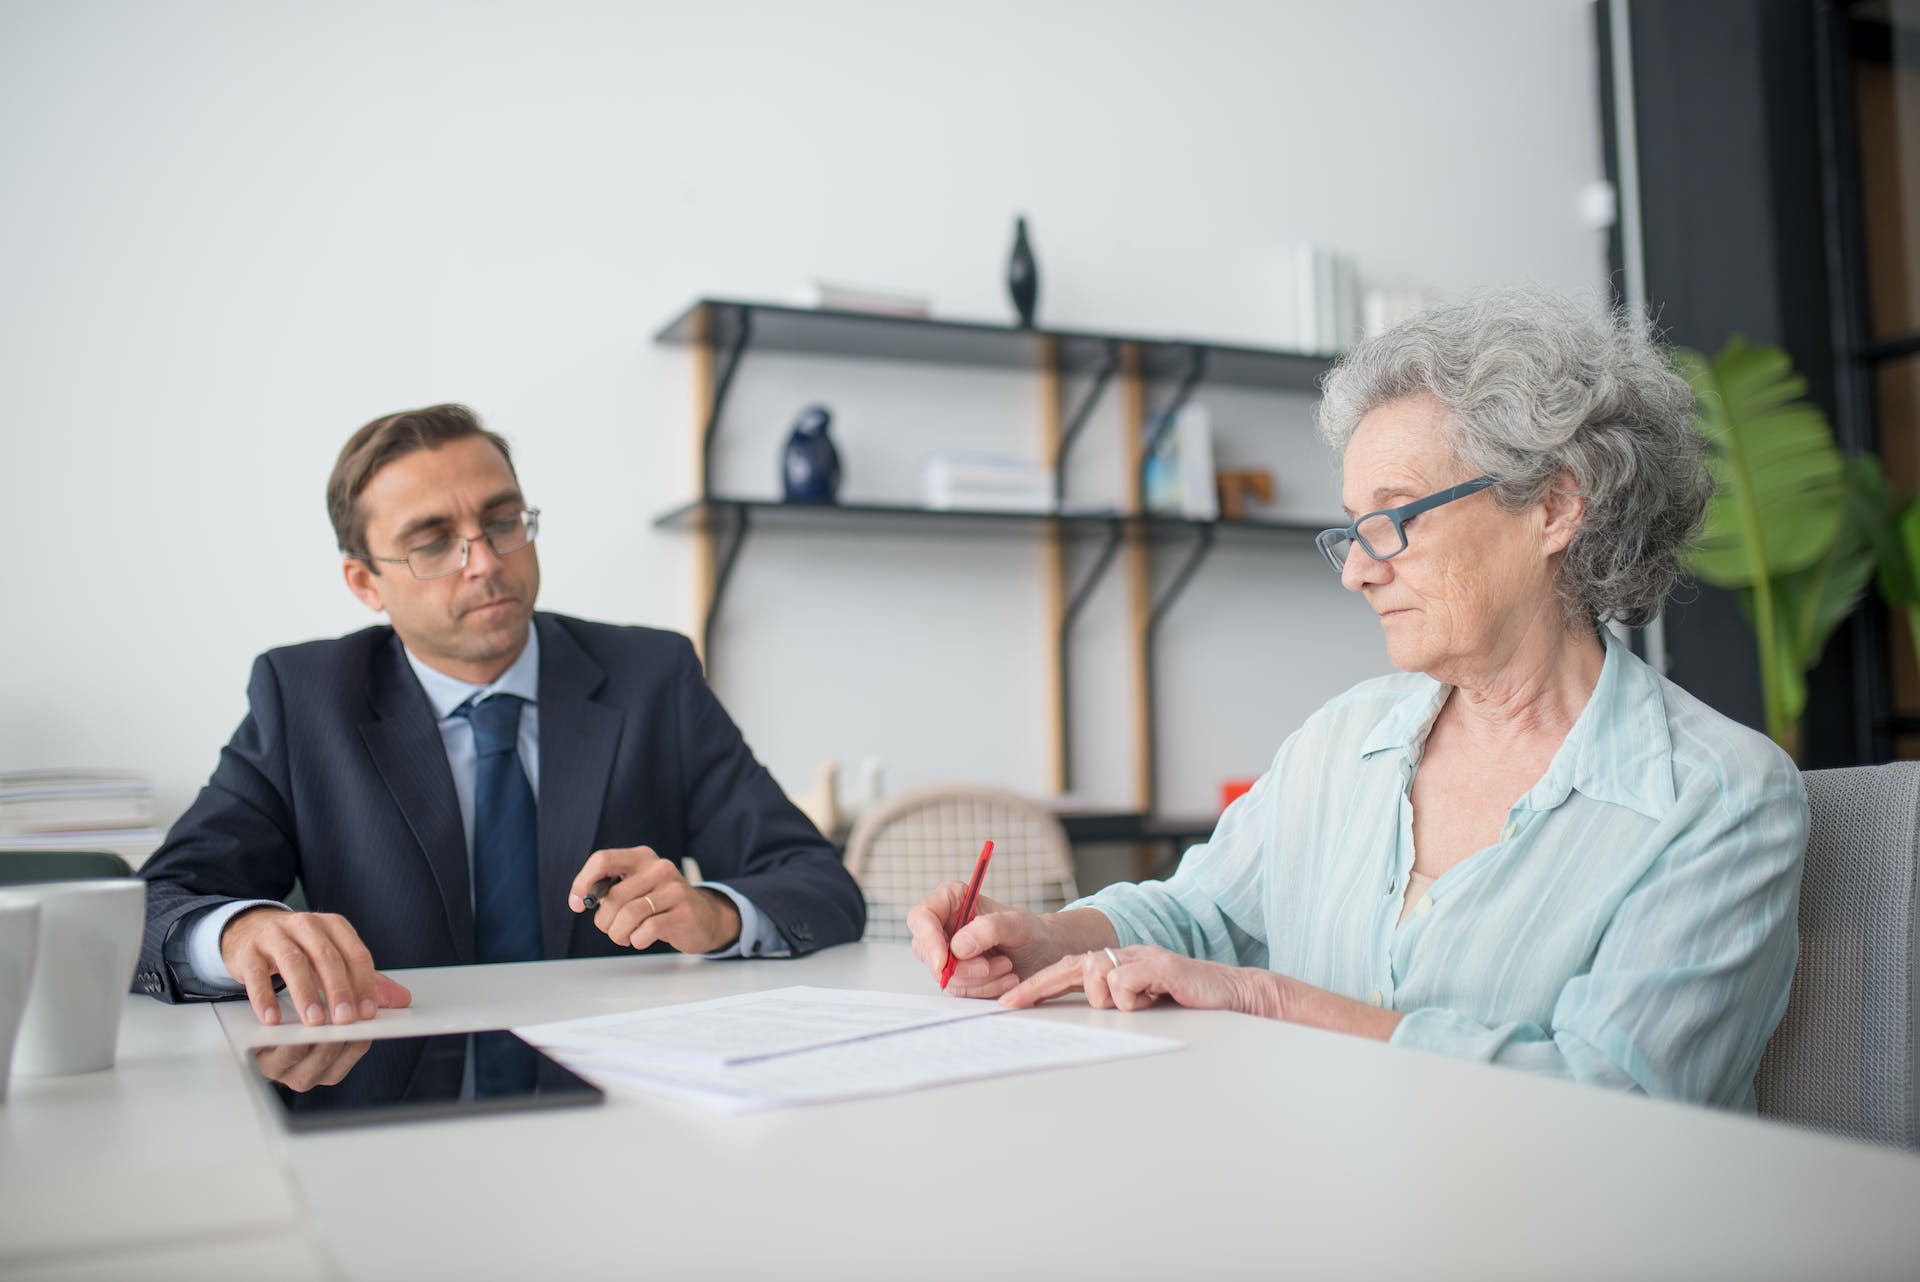 Elderly woman signing documents in a workplace | Source: Pexels